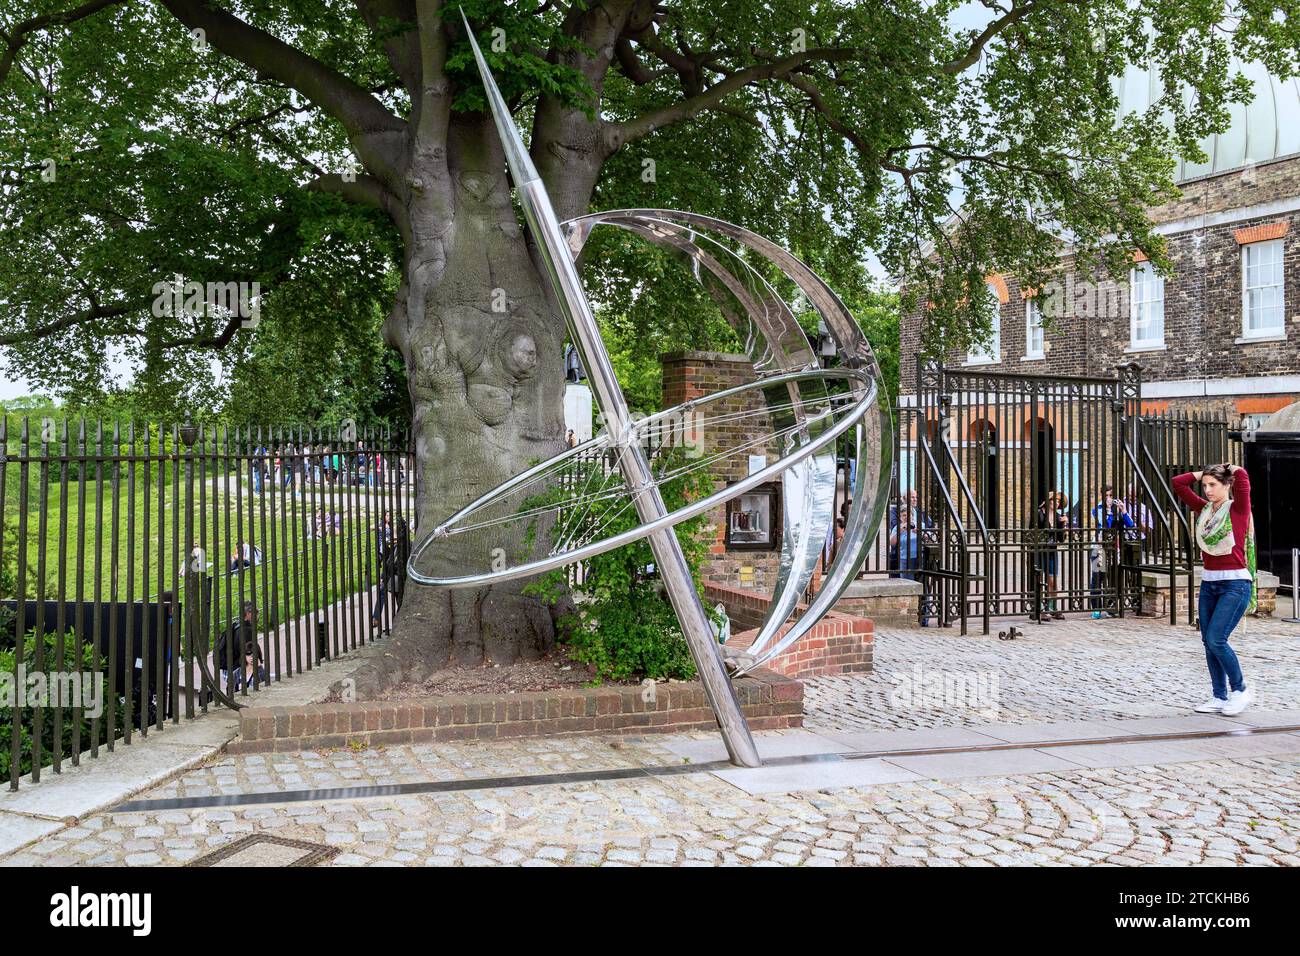 LONDON, GREAT BRITAIN - MAY 20, 2014: An unidentified visitor in front of the Prime Meridian at the Greenwich Observatory. Stock Photo